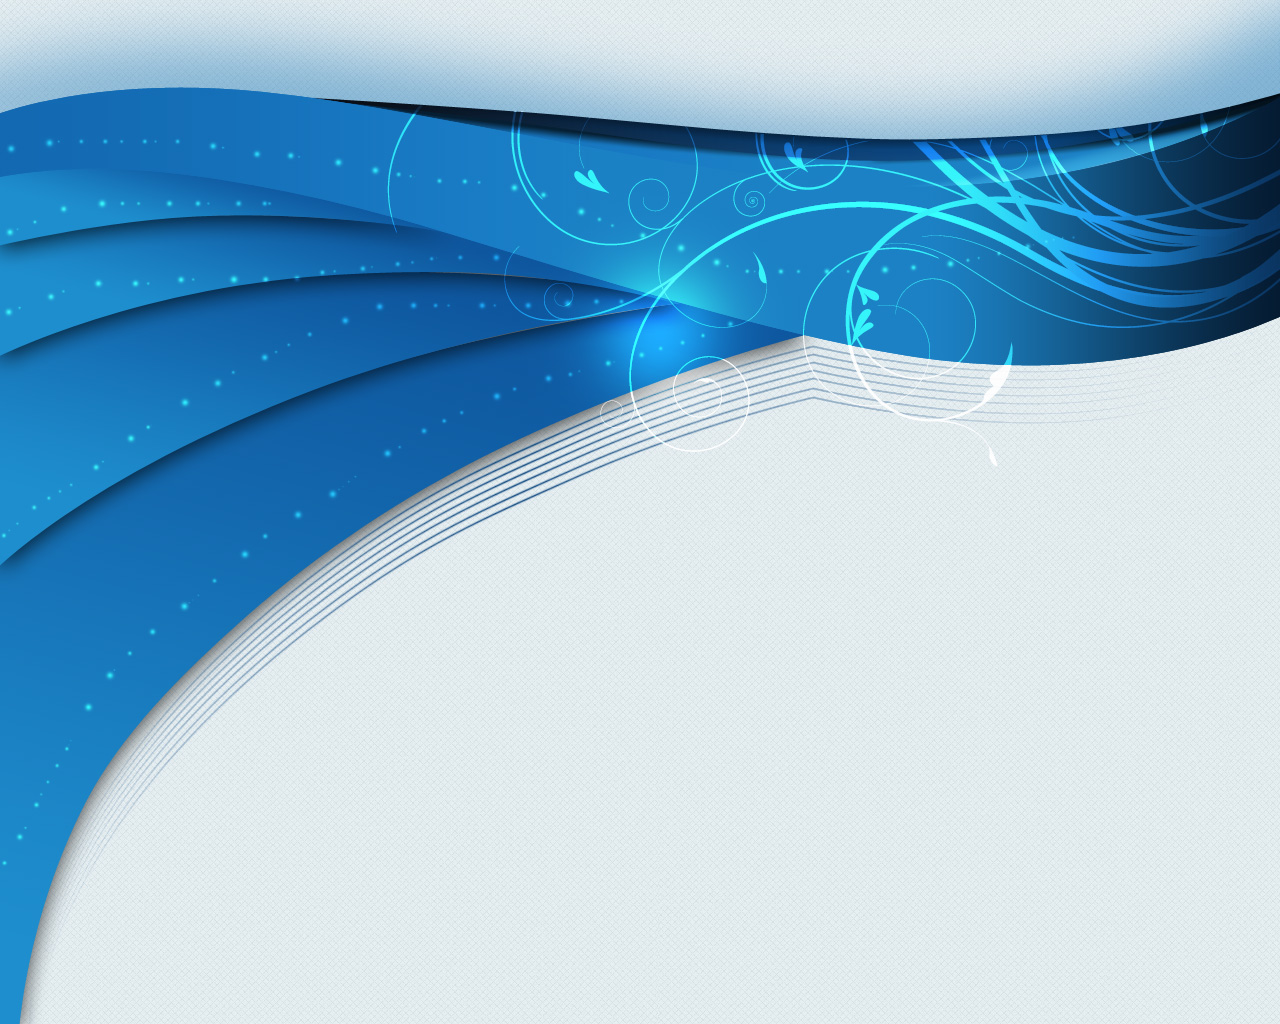 Blue Abstract Wave Vector